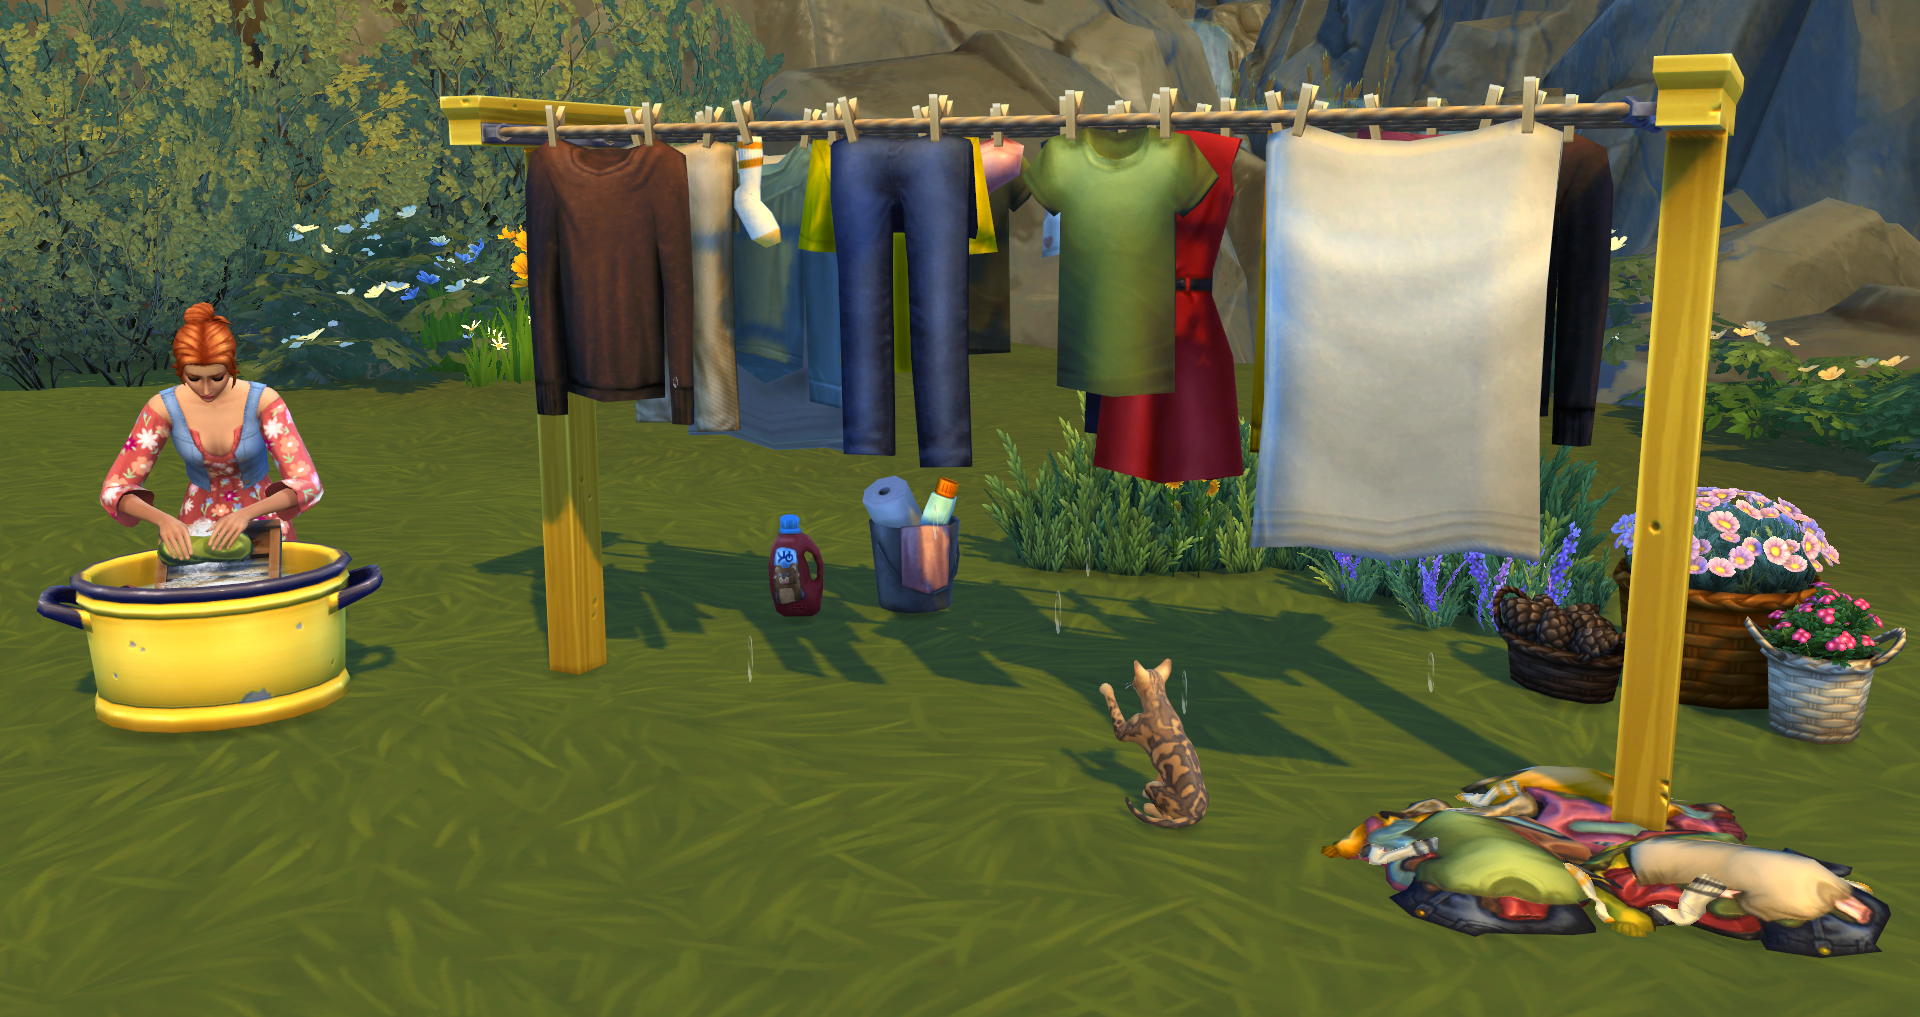 The Sims 4 Laundry Day Stuff Guide SimsVIP.